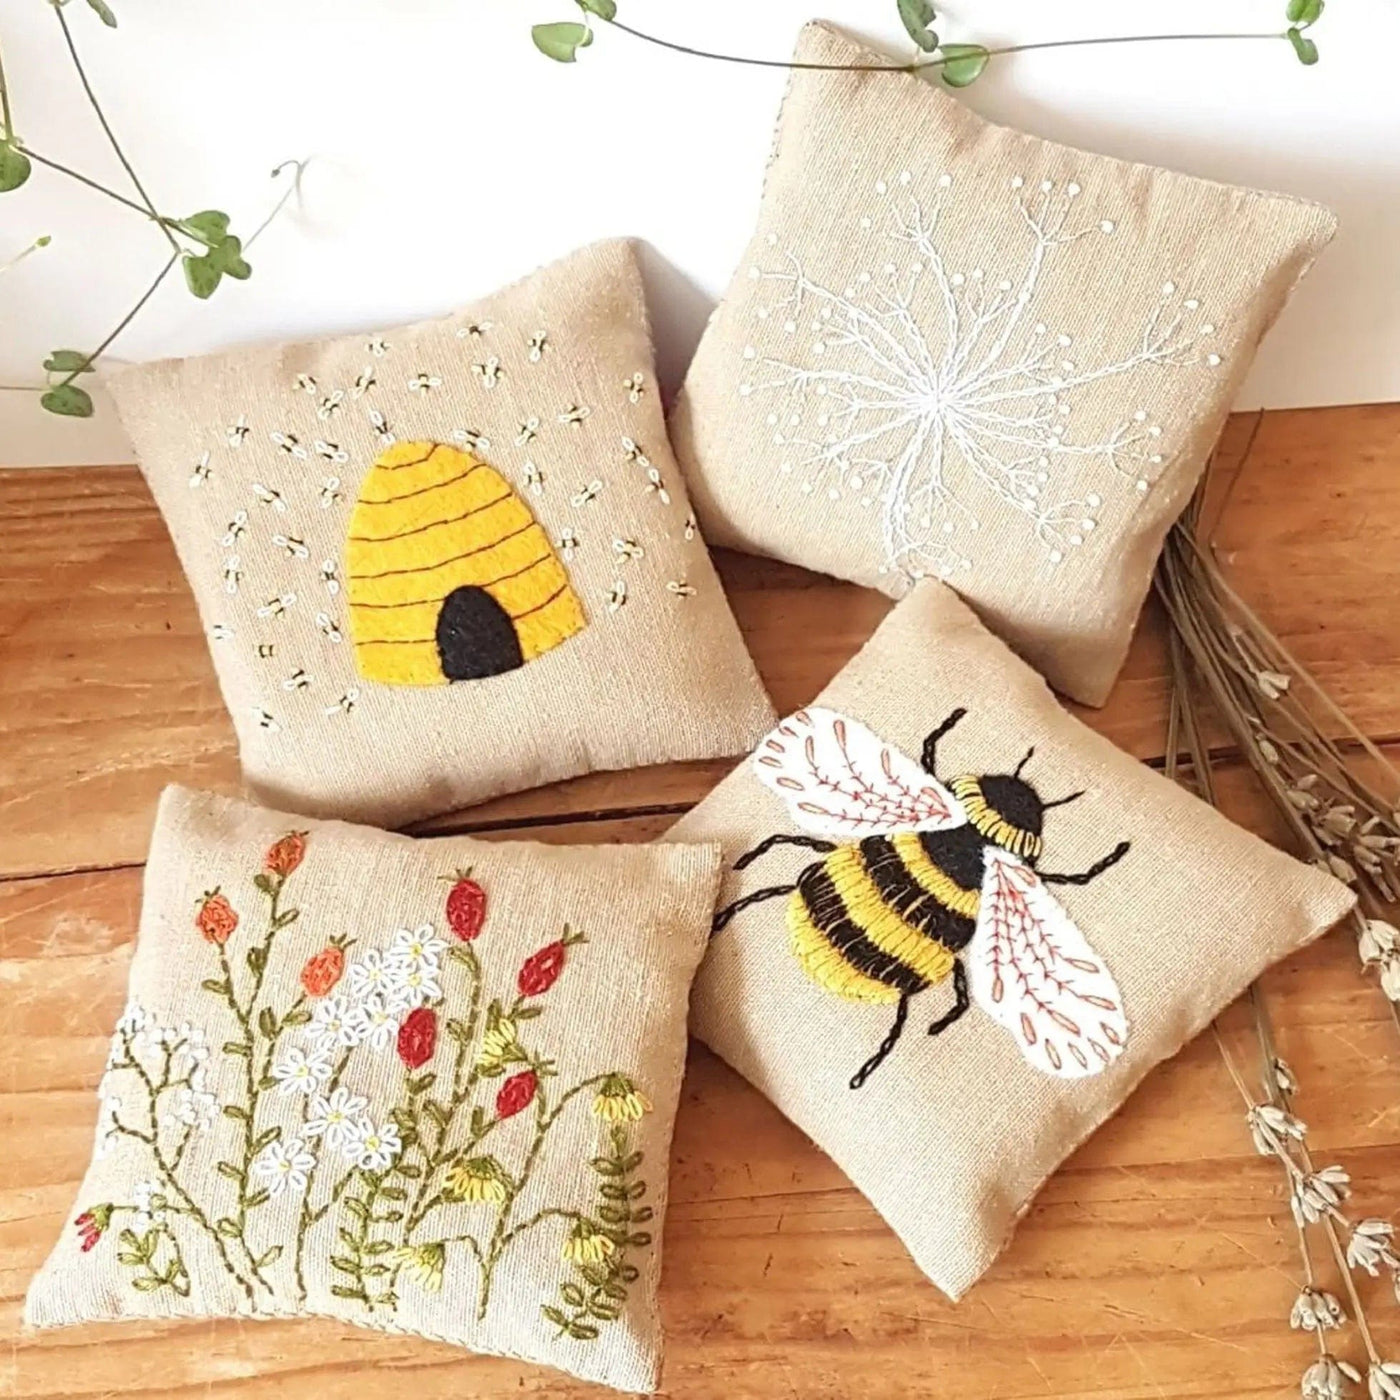 Corinne Lapierre Craft Sets Bumblebee and Floral Lavender Bags Embroidery Kit